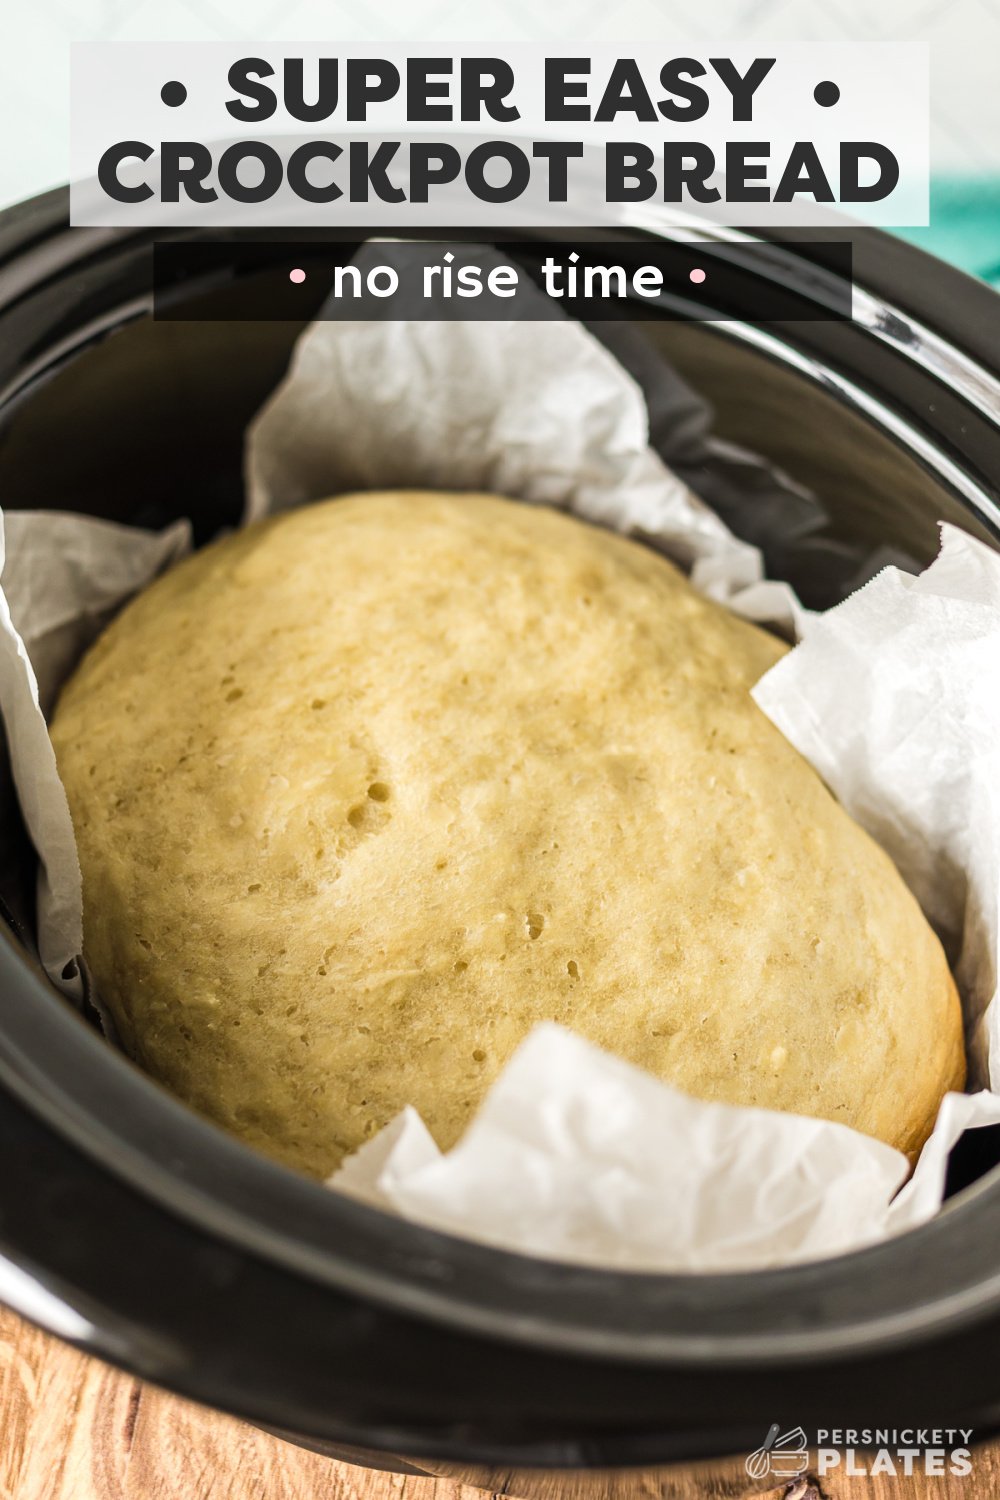 Rustic Slow Cooker Bread is exactly as easy and convenient as it sounds! Skip the loaf pan, the dough rise, and turning on the oven, because the crockpot does it all! | www.persnicketyplates.com